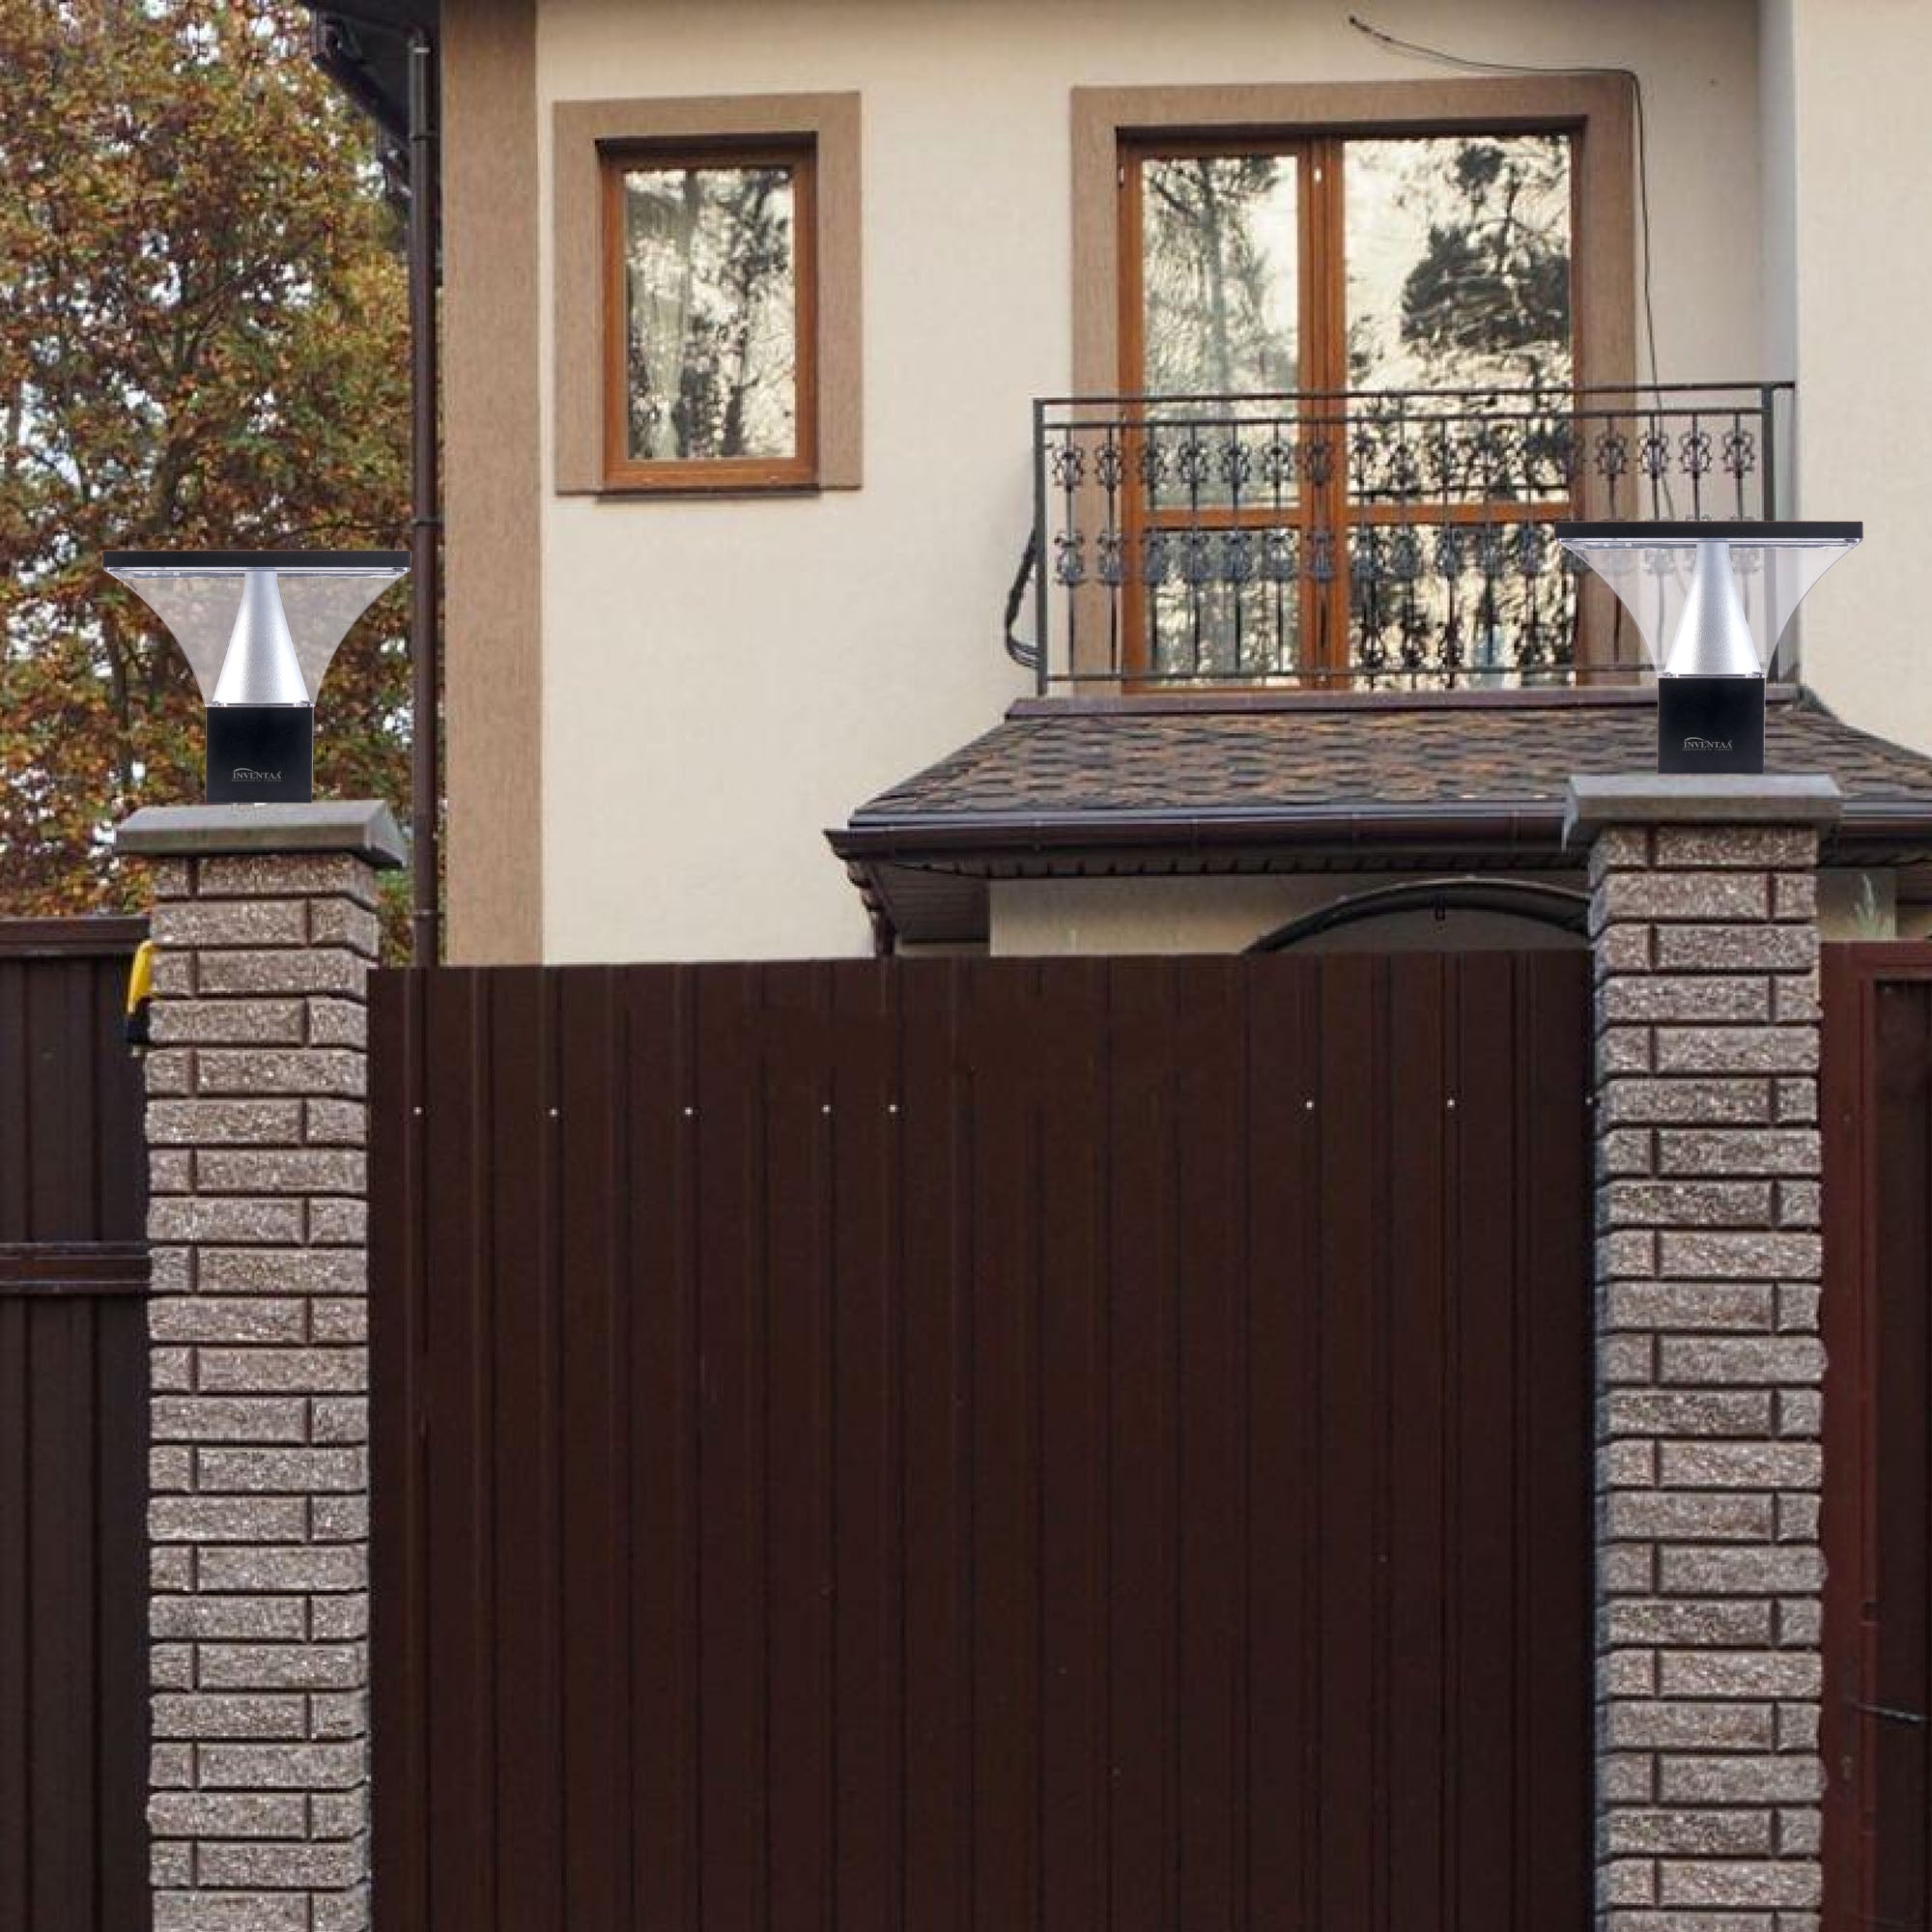 Bloom LED Gate Light For Welcoming Home Entrance With 1 Year Free Bulb Replacement Warranty